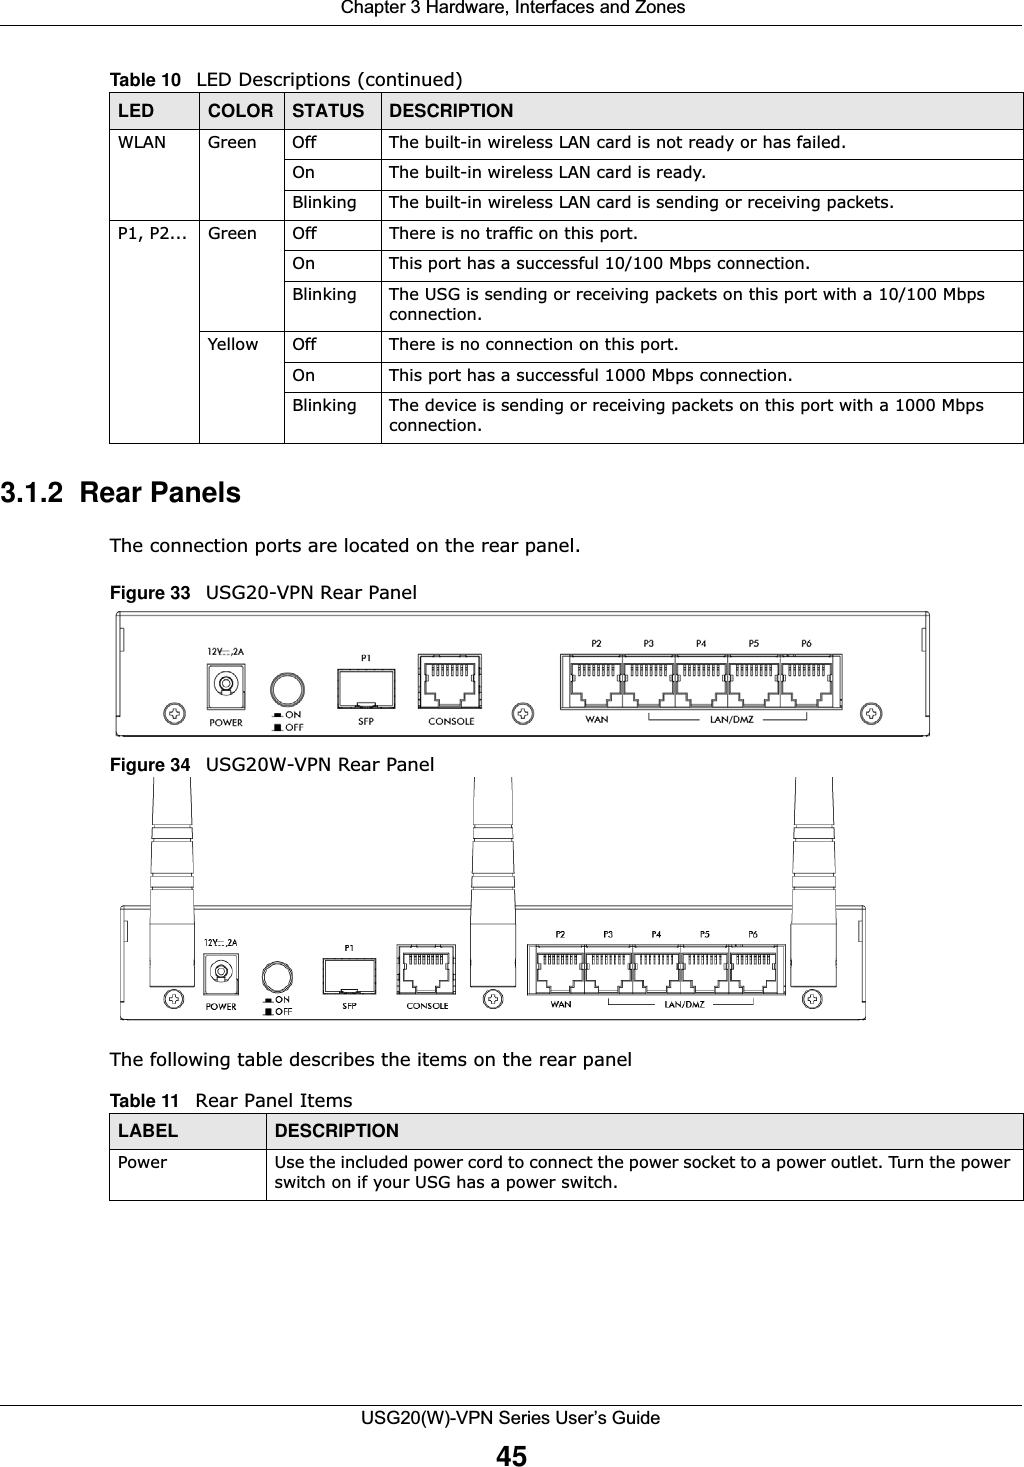  Chapter 3 Hardware, Interfaces and ZonesUSG20(W)-VPN Series User’s Guide453.1.2  Rear PanelsThe connection ports are located on the rear panel.Figure 33   USG20-VPN Rear PanelFigure 34   USG20W-VPN Rear PanelThe following table describes the items on the rear panelWLAN Green Off The built-in wireless LAN card is not ready or has failed.On The built-in wireless LAN card is ready.Blinking The built-in wireless LAN card is sending or receiving packets.P1, P2... Green Off There is no traffic on this port.On This port has a successful 10/100 Mbps connection.Blinking The USG is sending or receiving packets on this port with a 10/100 Mbps connection.Yellow Off There is no connection on this port.On This port has a successful 1000 Mbps connection.Blinking The device is sending or receiving packets on this port with a 1000 Mbps connection.Table 10   LED Descriptions (continued)LED COLOR STATUS DESCRIPTIONTable 11   Rear Panel ItemsLABEL DESCRIPTIONPower Use the included power cord to connect the power socket to a power outlet. Turn the power switch on if your USG has a power switch.